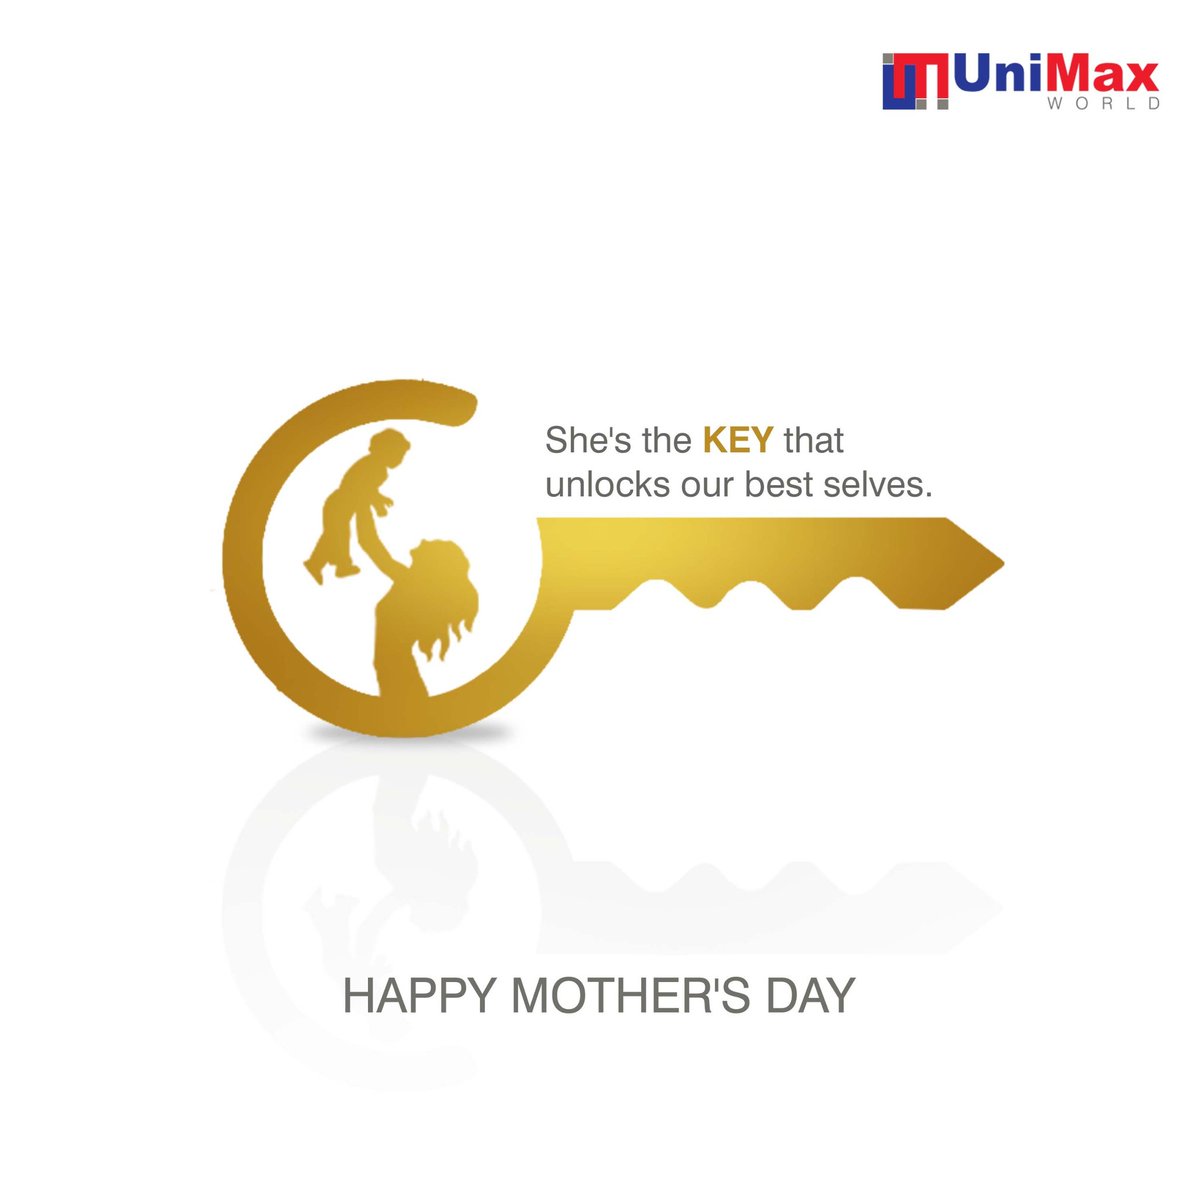 To the queens of our hearts, whose love knows no bounds. Wishing all moms a joy, appreciation, and love-filled day.

#UnimaxWorld #QueensOfOurHearts #UnconditionalLove #MomIsMyHero #MomLove #HeartfeltWishes #FamilyFirst #MomAndMe #CelebrateMom